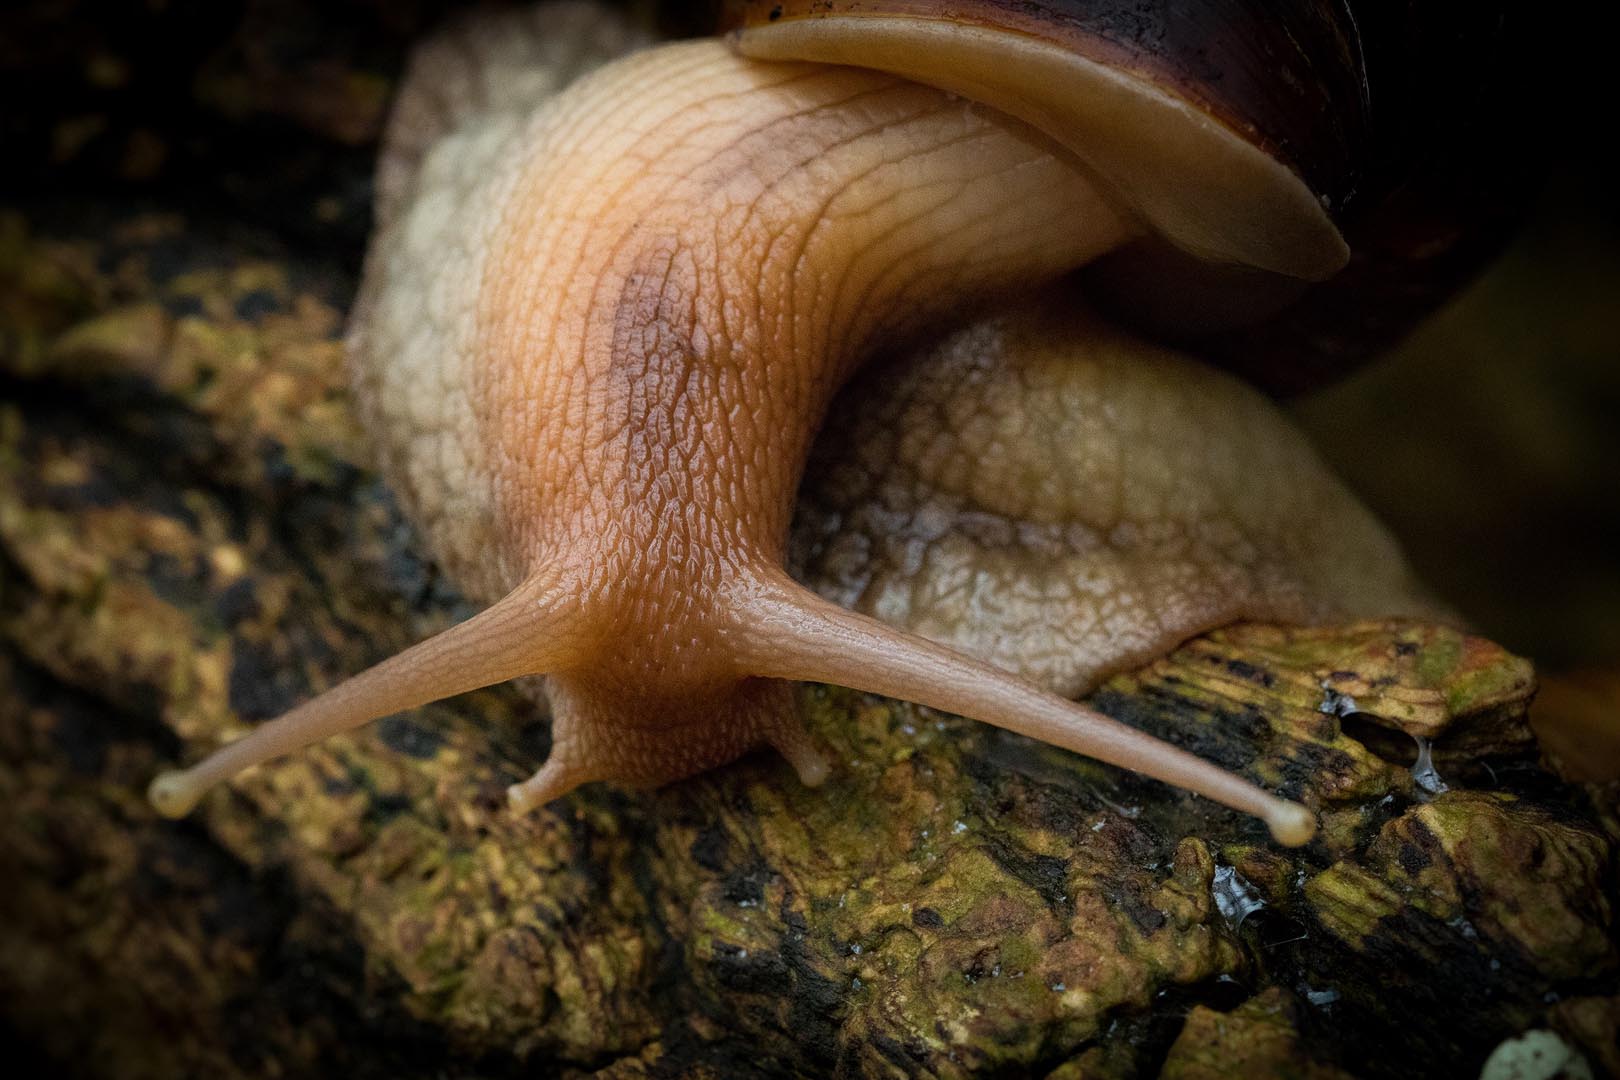 Close up image of Giant African land snail on log with face pointed toward camera